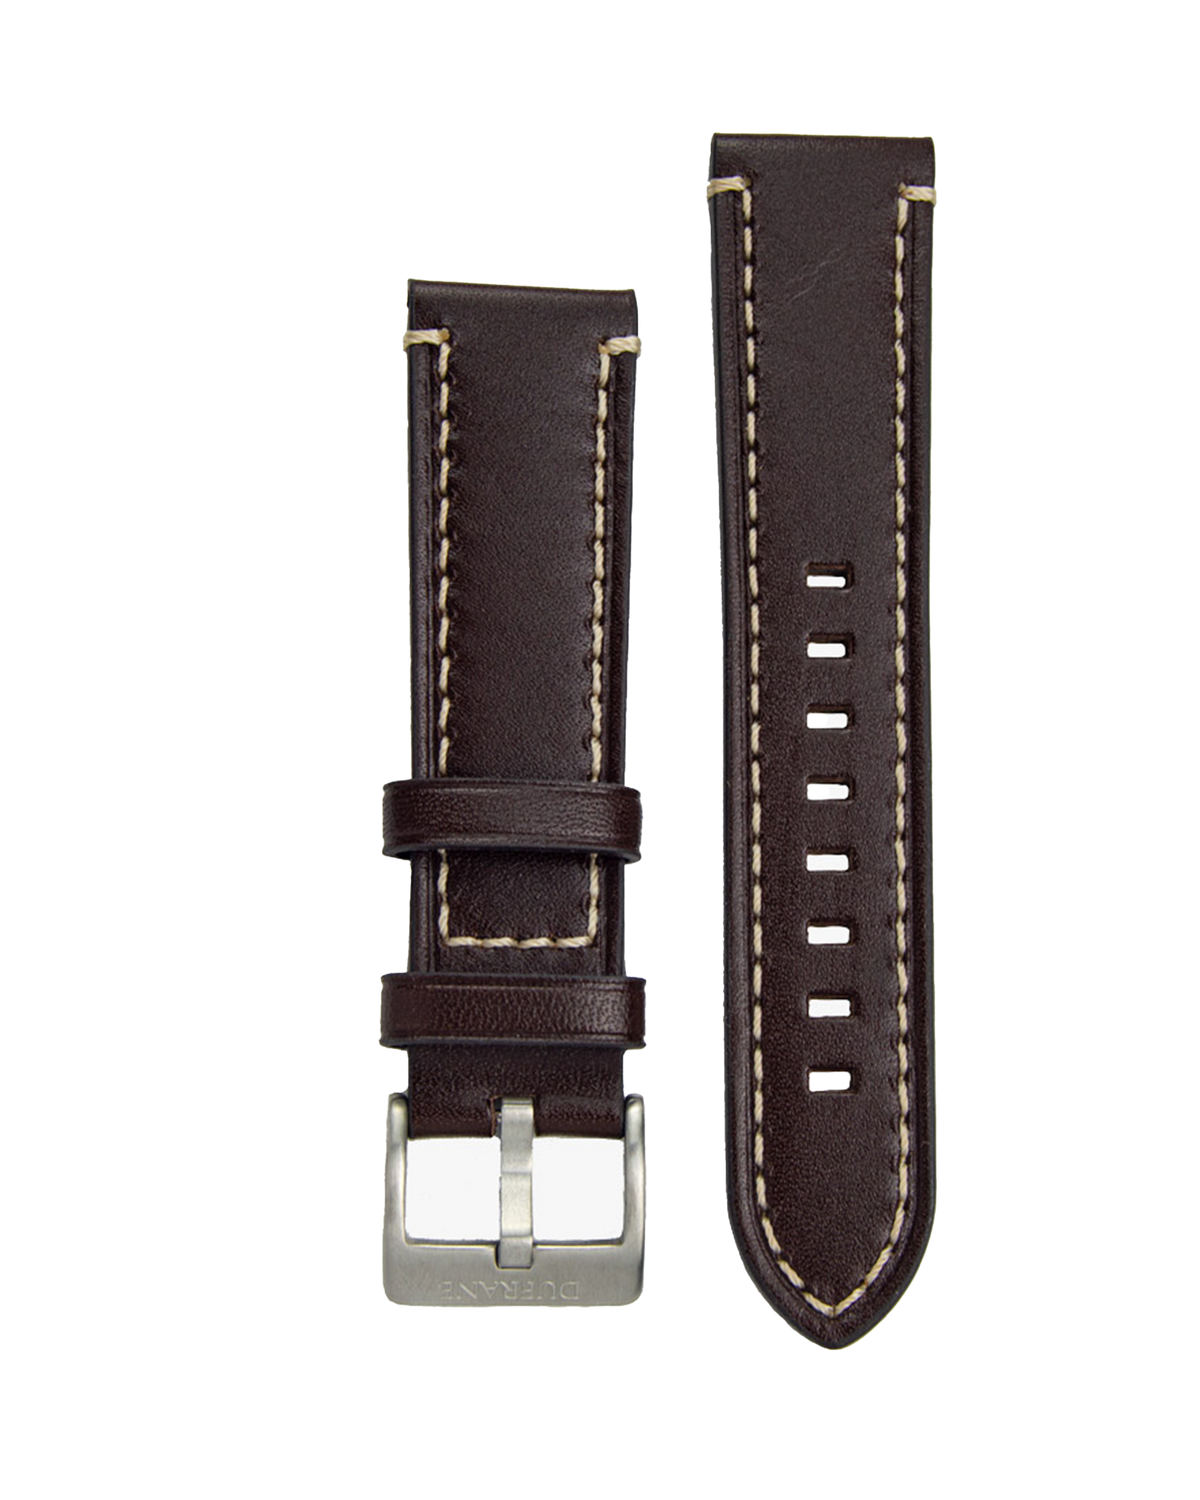 20mm/22mm Leather Strap (Brown or Black)